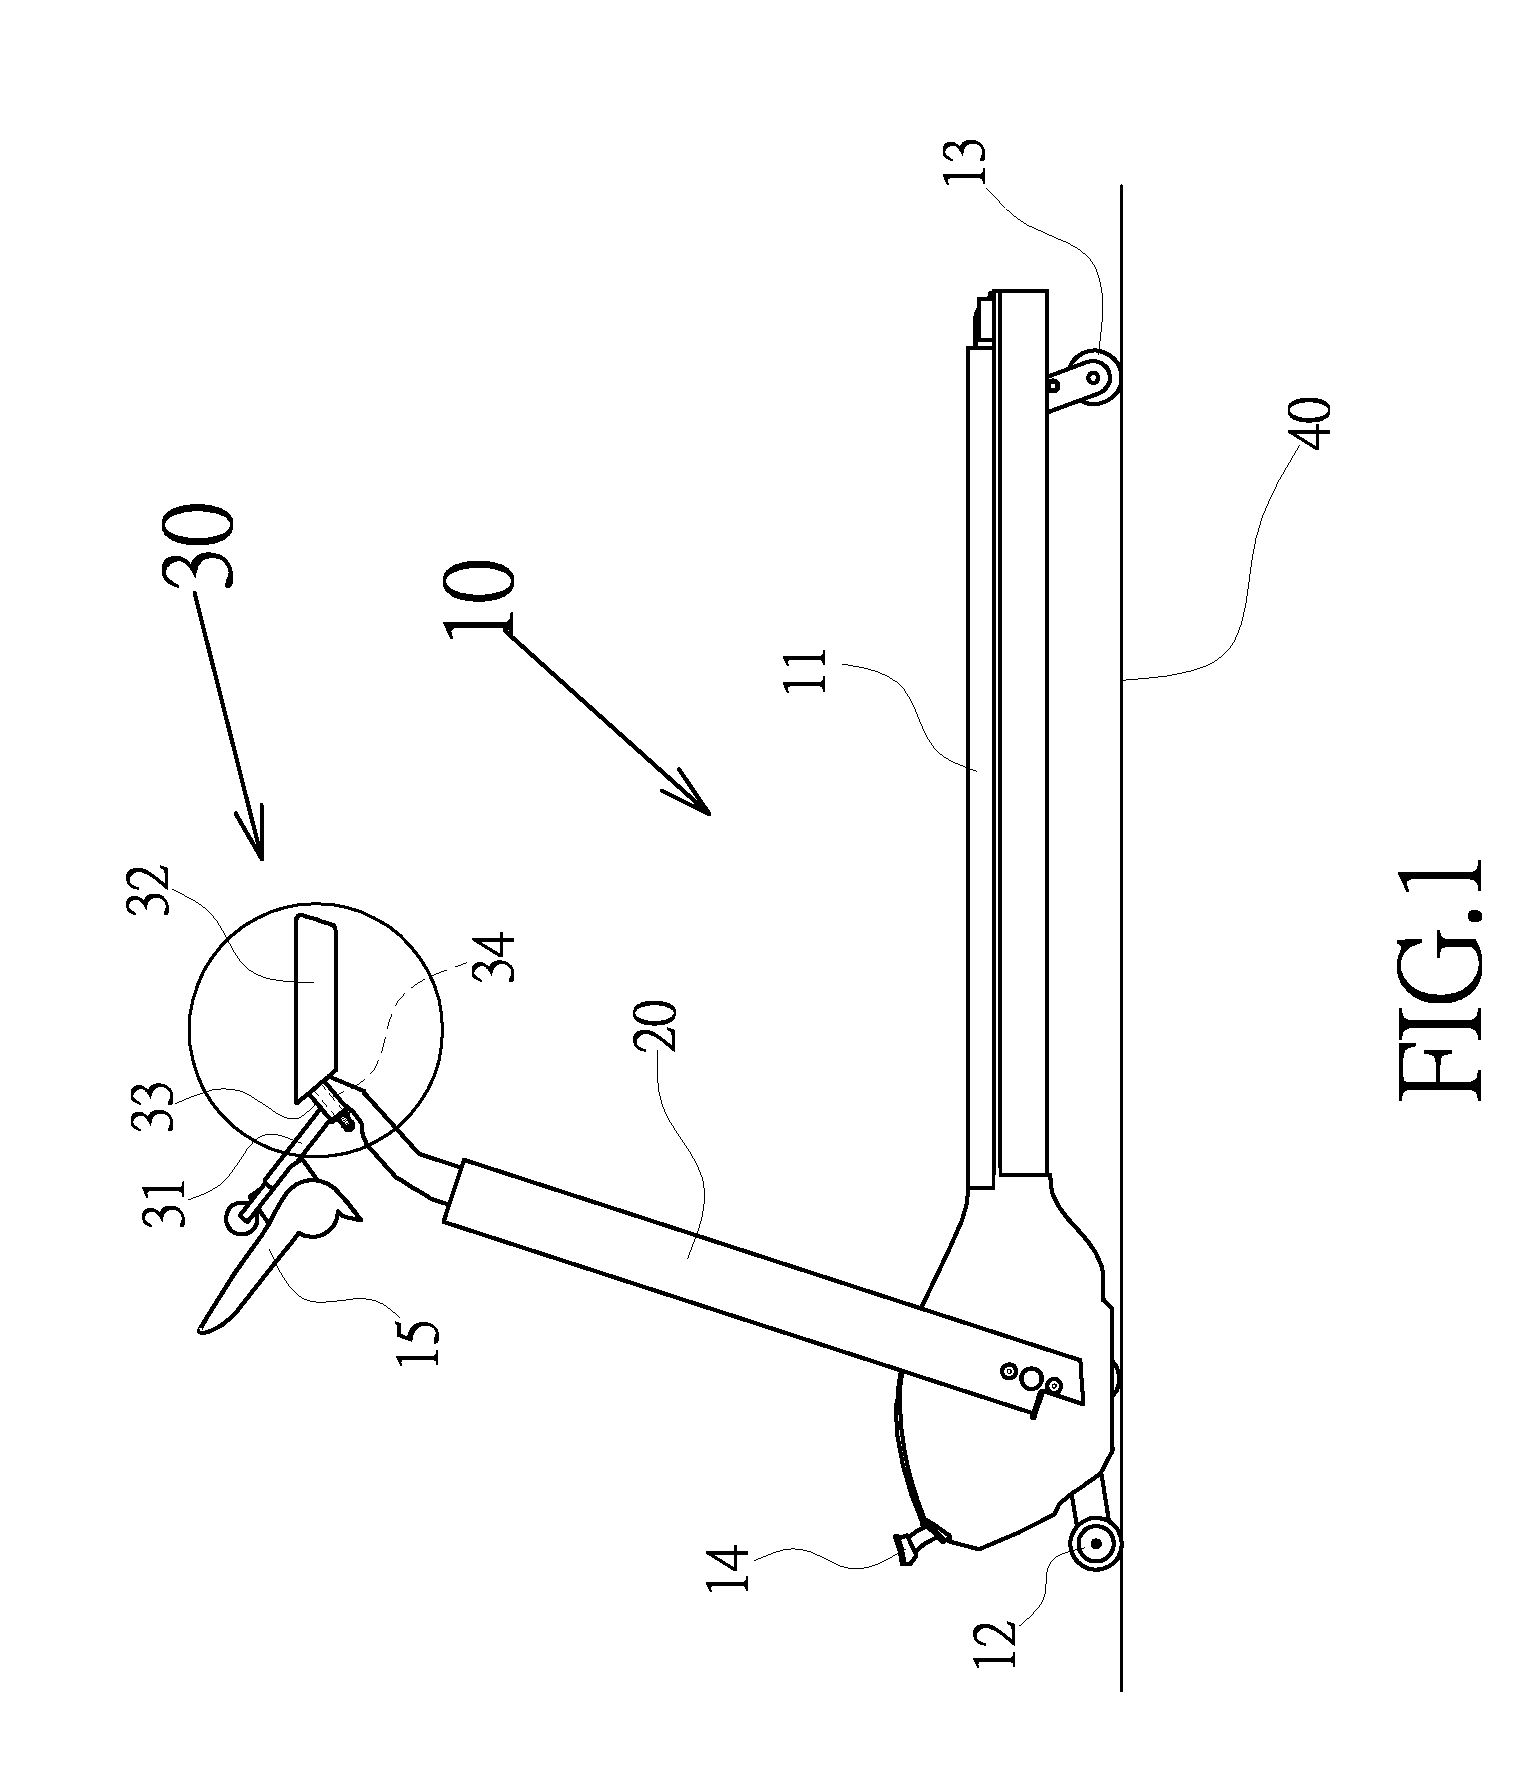 Bendable handrail assembly of an exercise apparatus